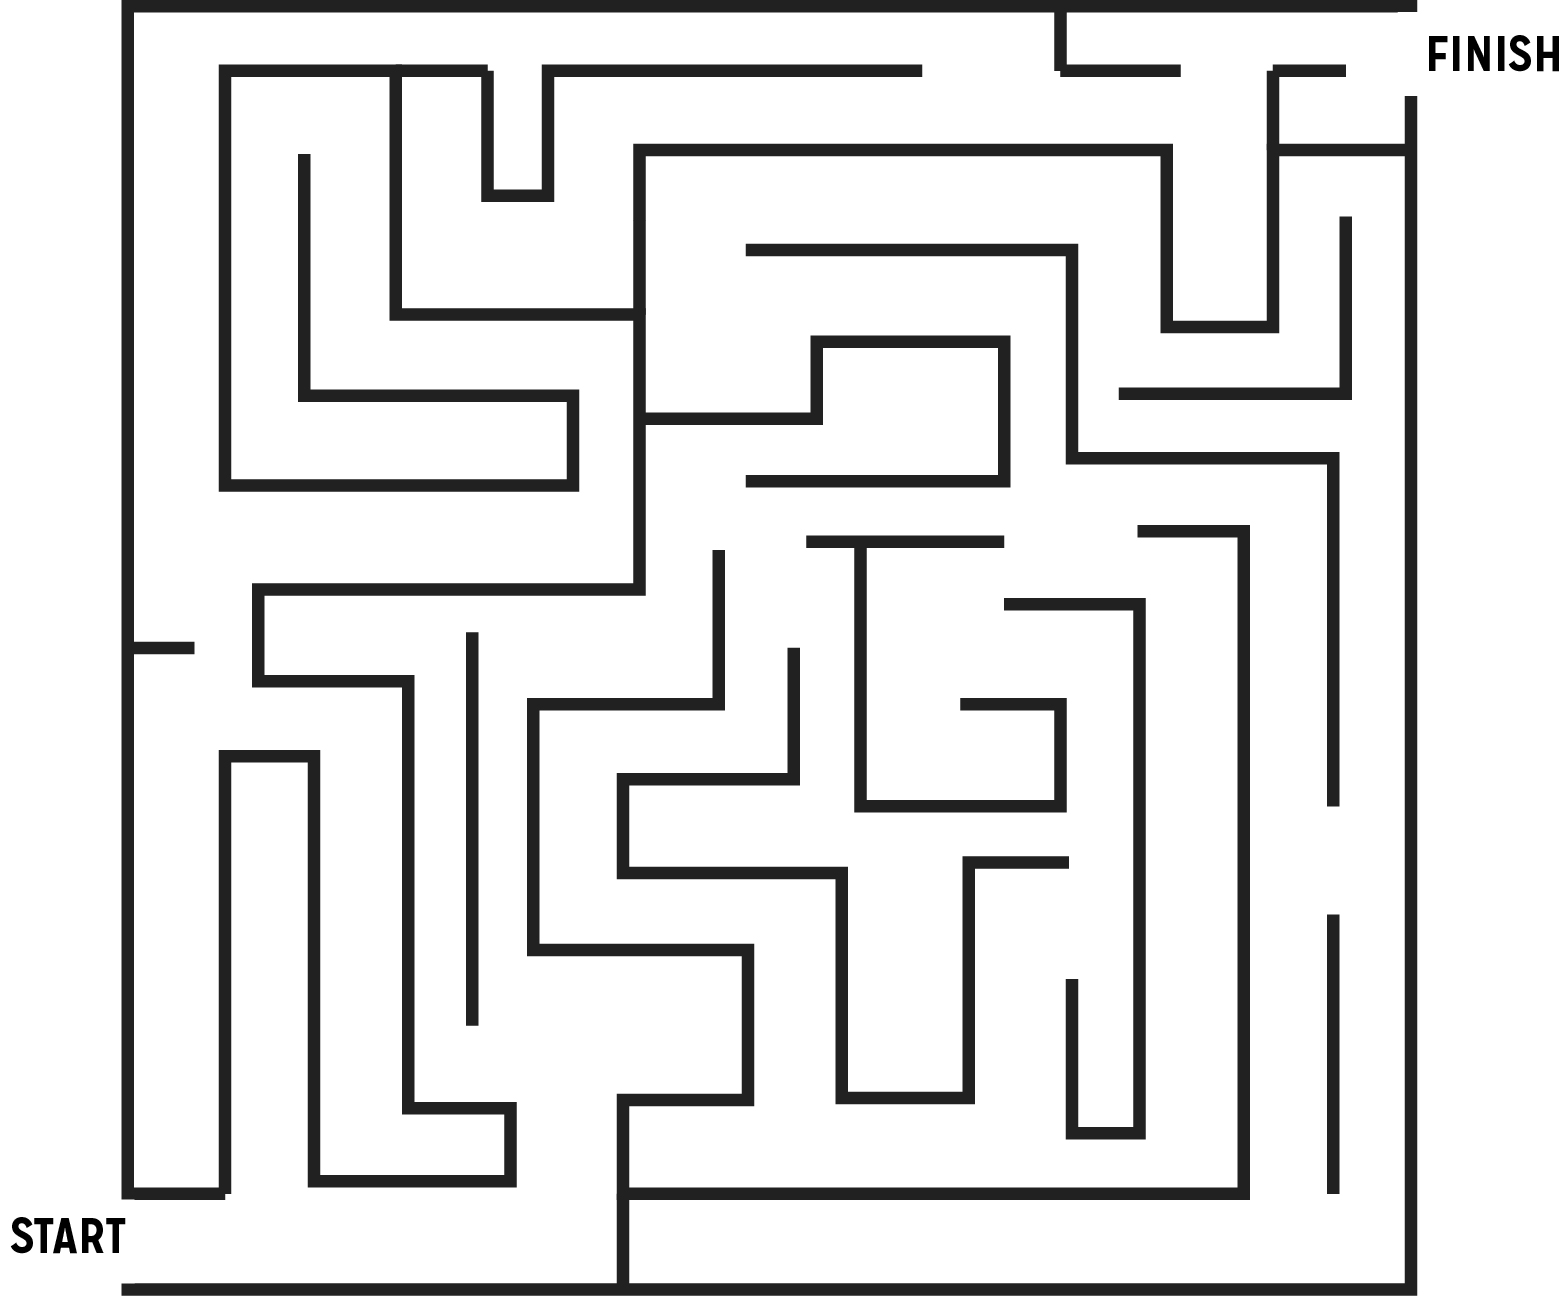 A website, or a labyrinth?